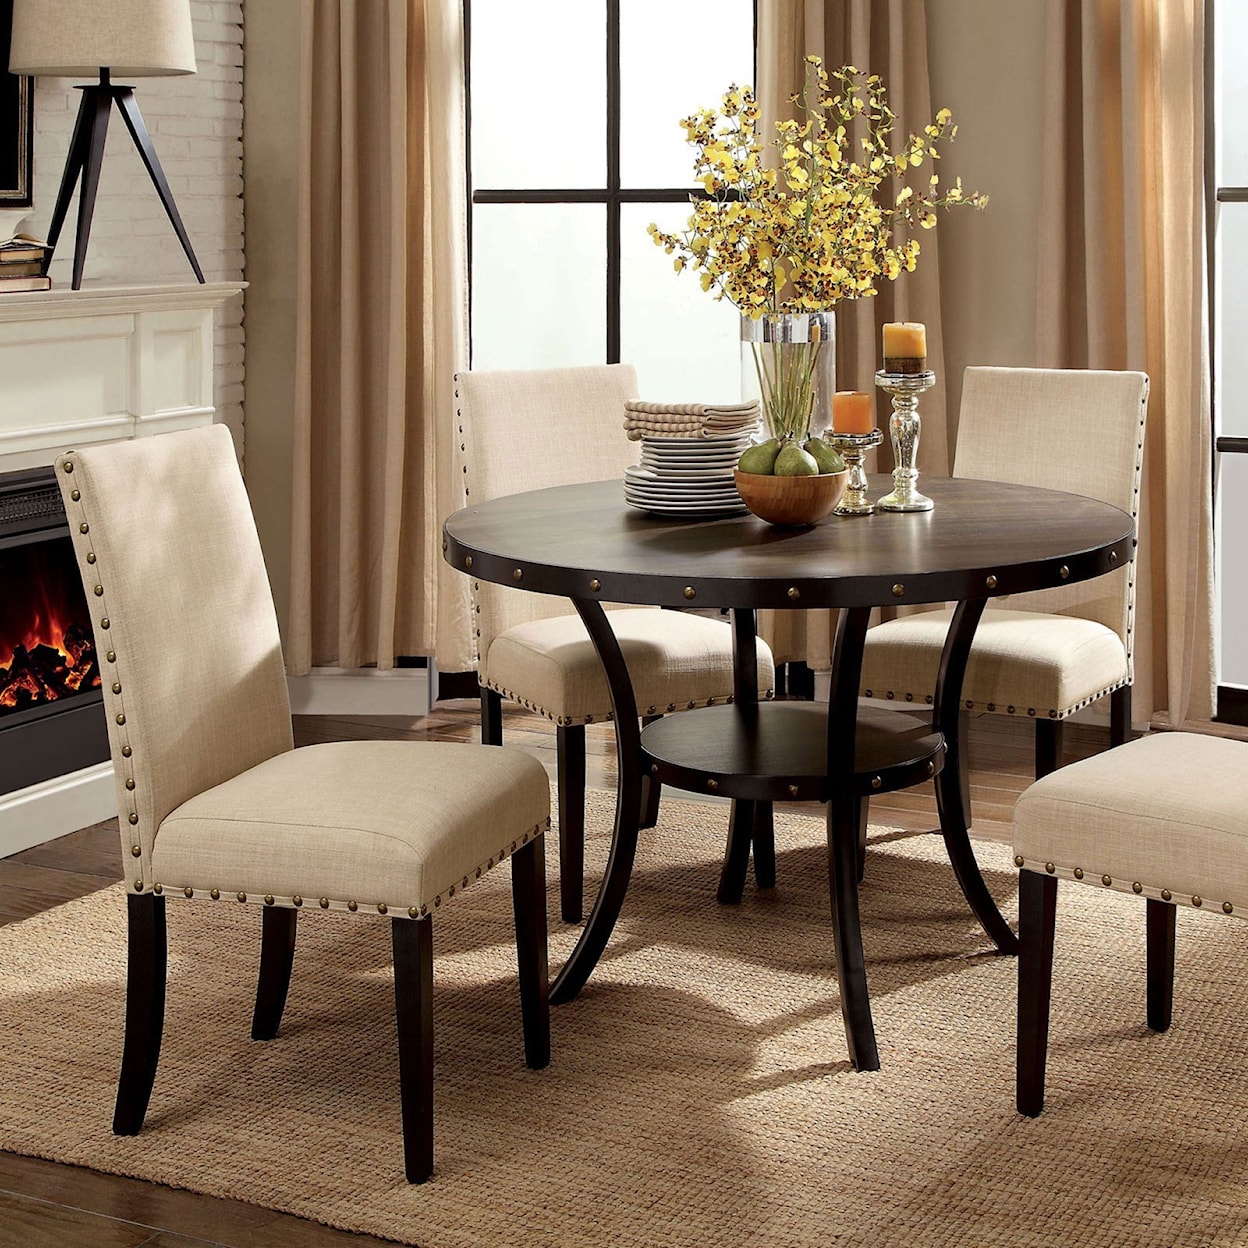 Furniture of America Kaitlin Round Dining Table